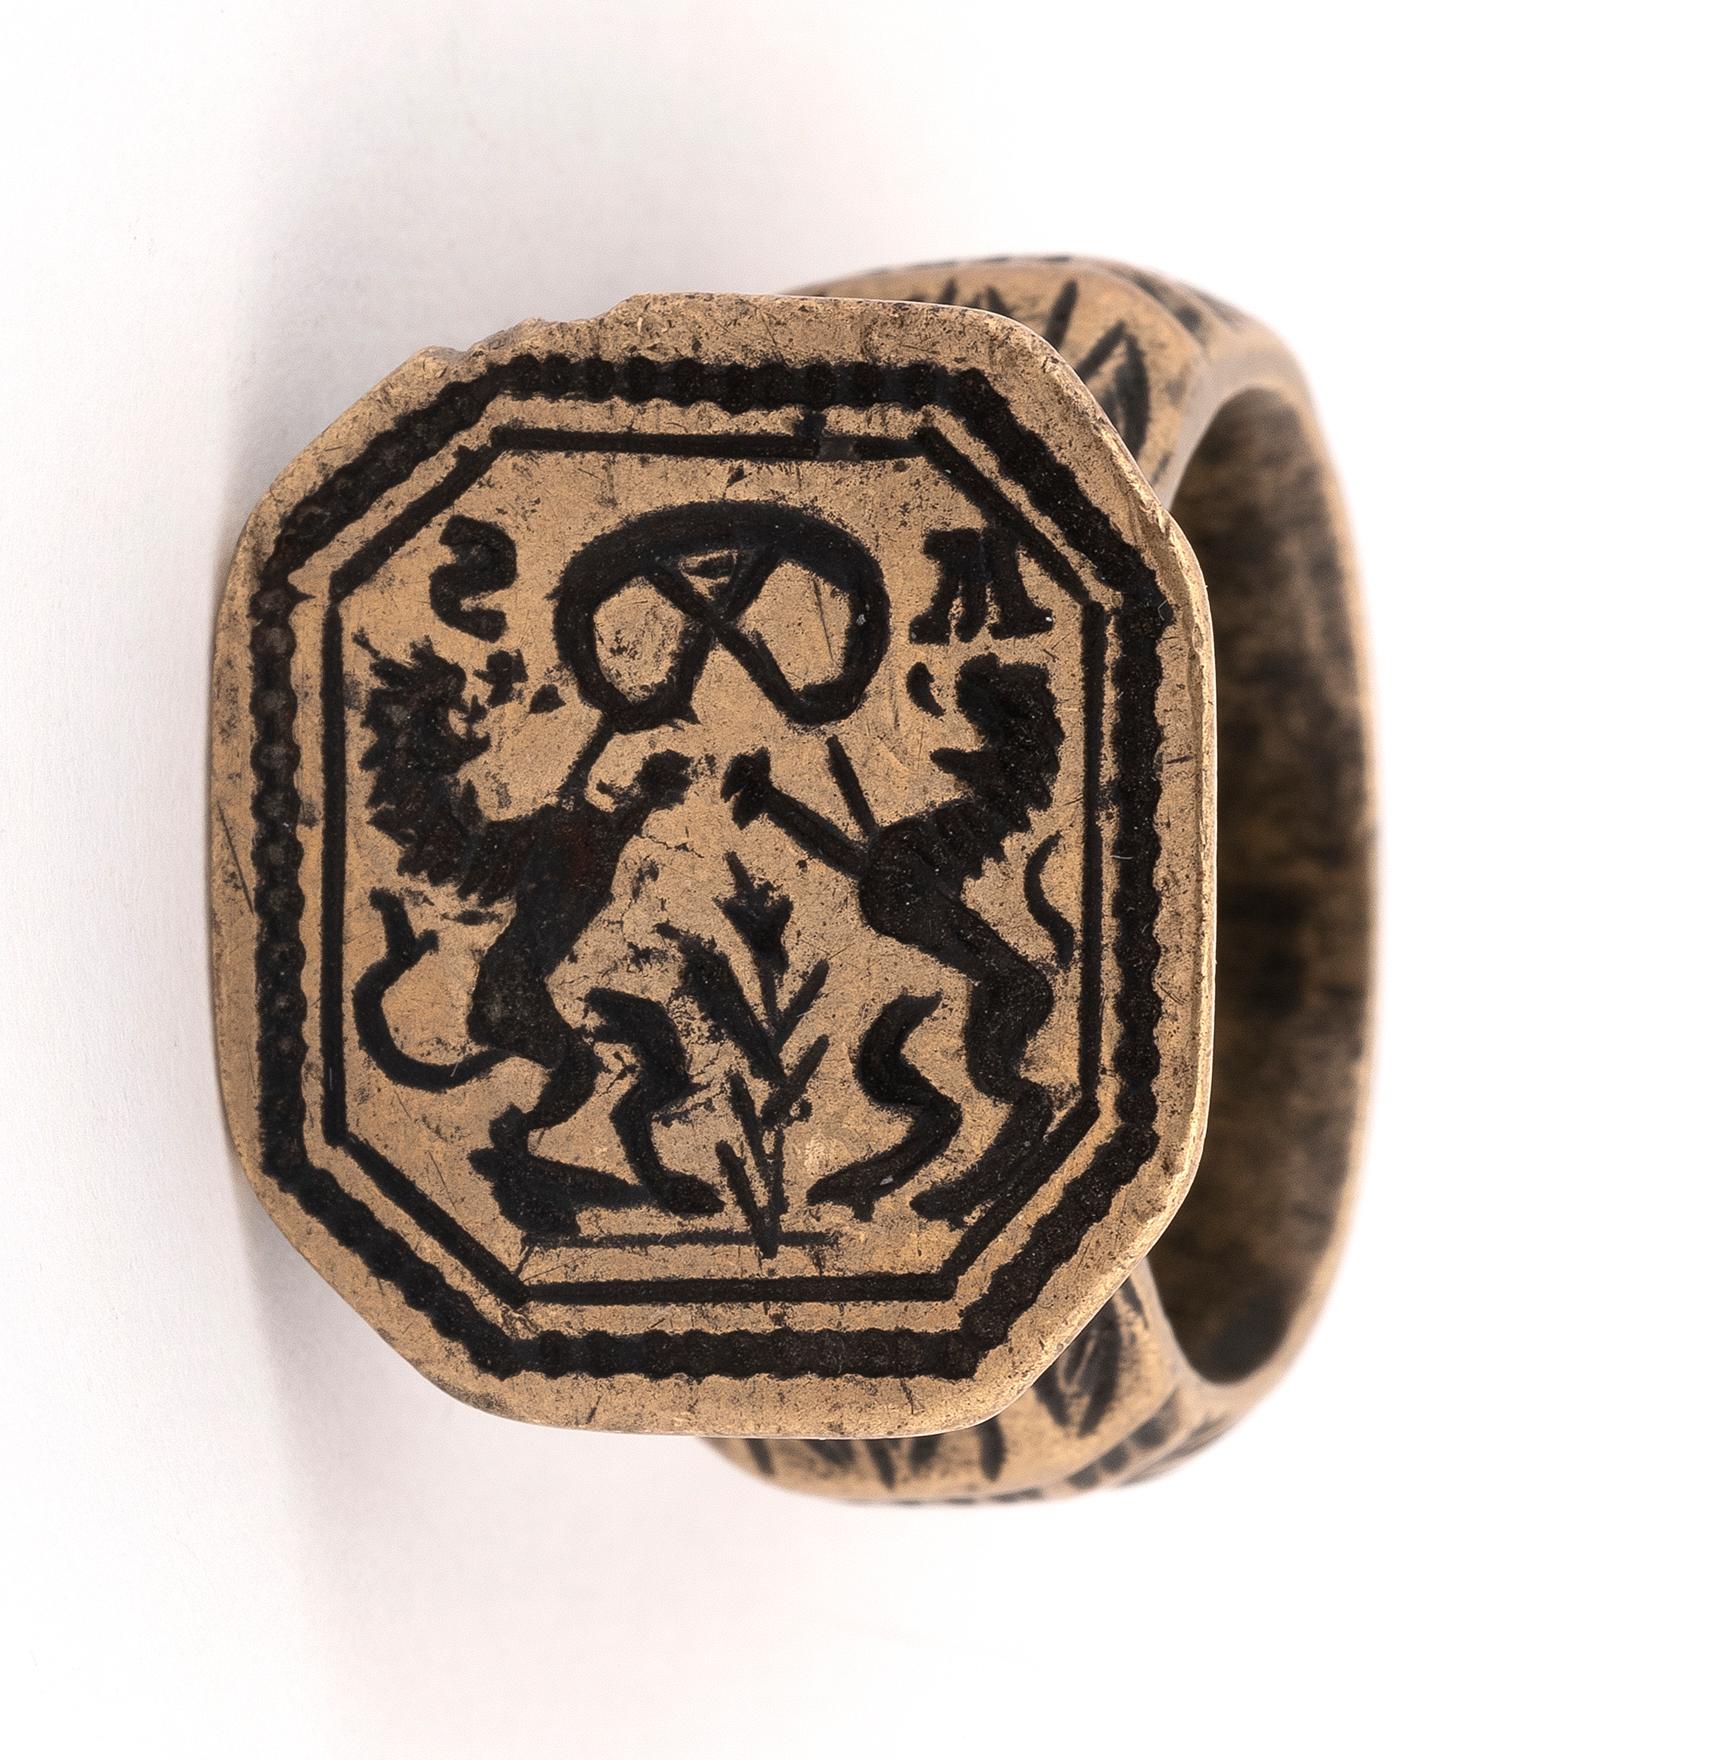 The bronze ring with an octagonal plaque carved with merchant's symbols.
Dated 1773
Ring size 9